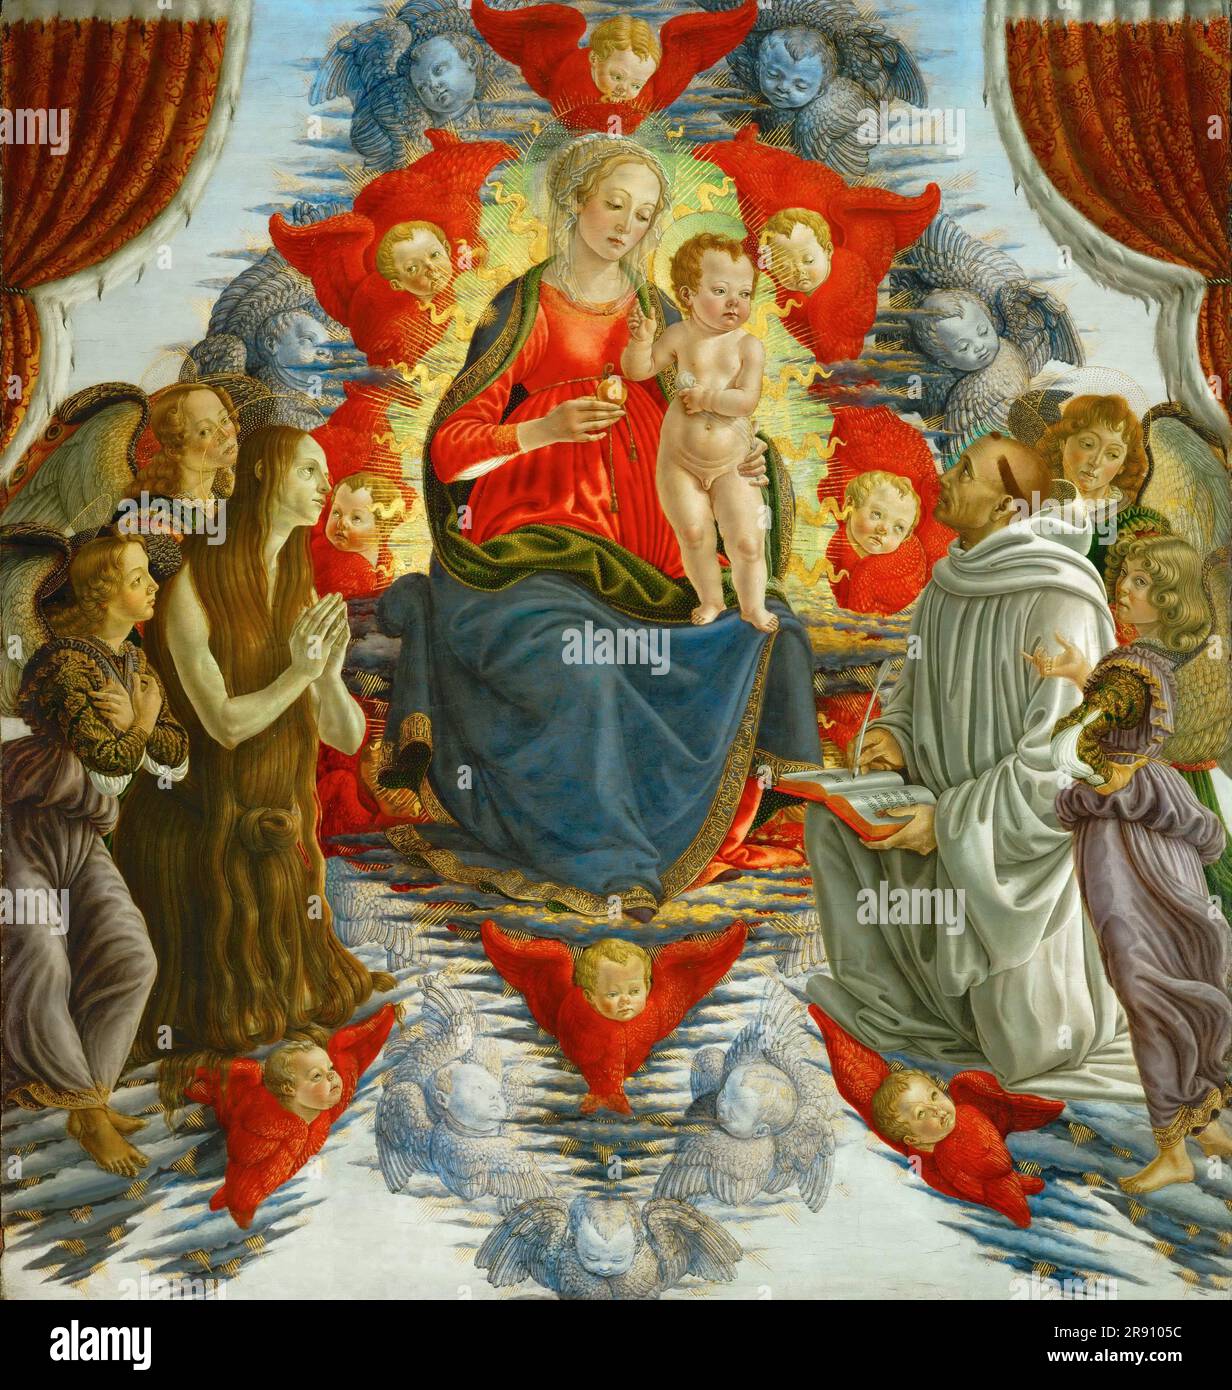 Madonna in Glory with Saint Mary Magdalene, Saint Bernard and Angels, Last quarter of 15th century. Found in the collection of the Mus&#xe9;e du Louvre, Paris. Stock Photo